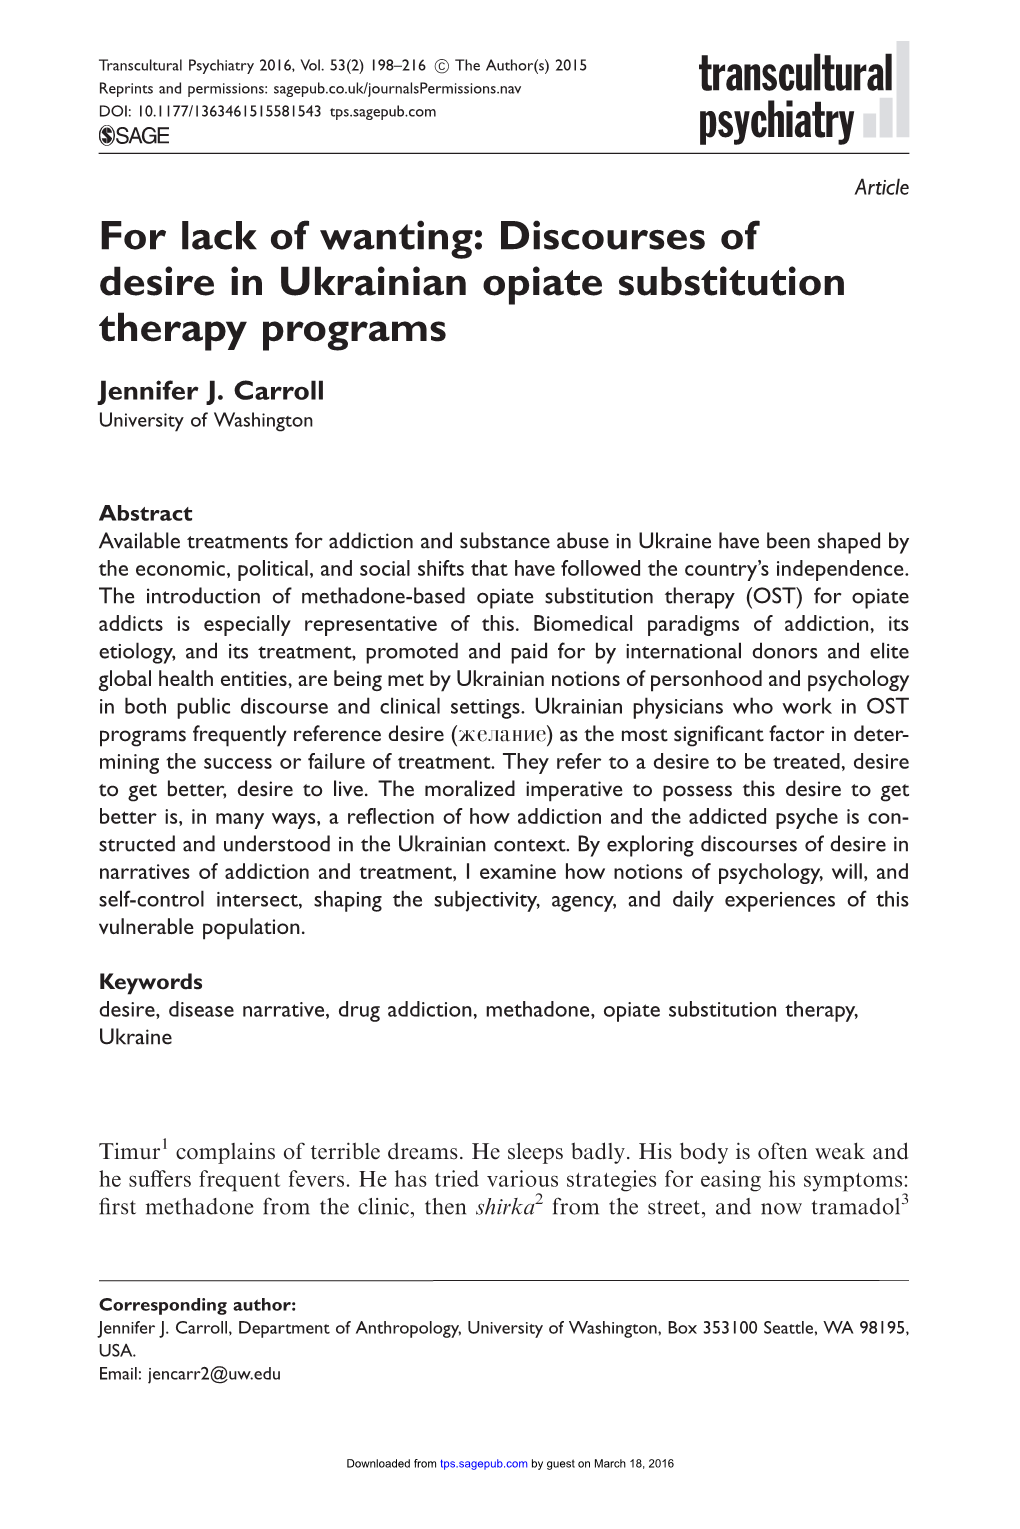 For Lack of Wanting: Discourses of Desire in Ukrainian Opiate Substitution Therapy Programs